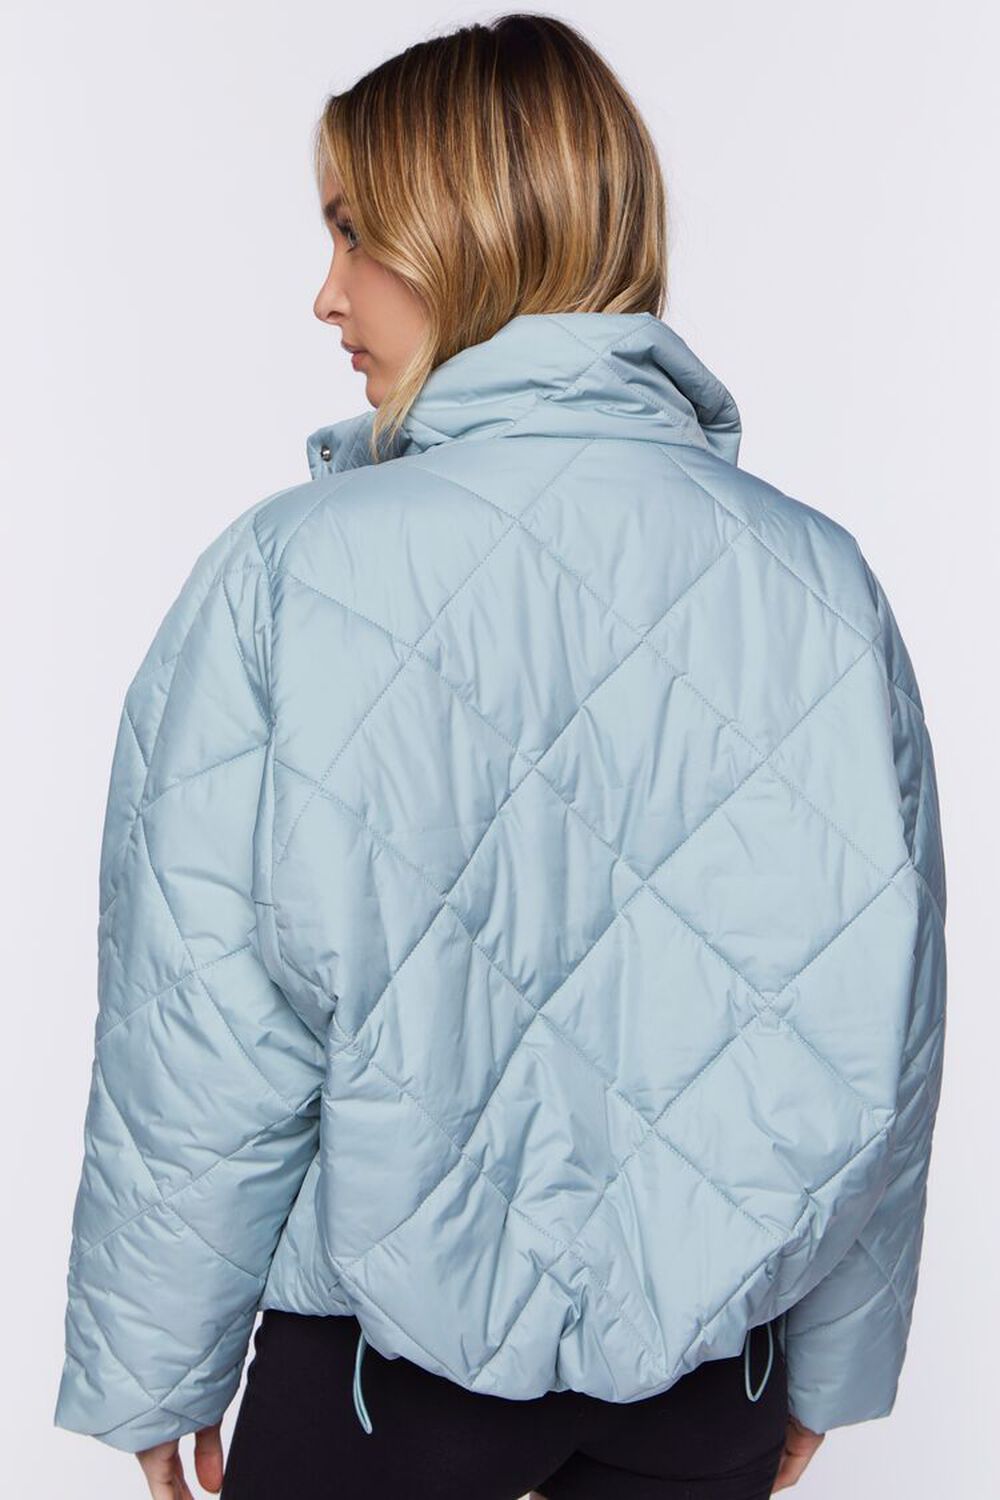 SEAFOAM Quilted Toggle-Drawstring Puffer Jacket, image 3